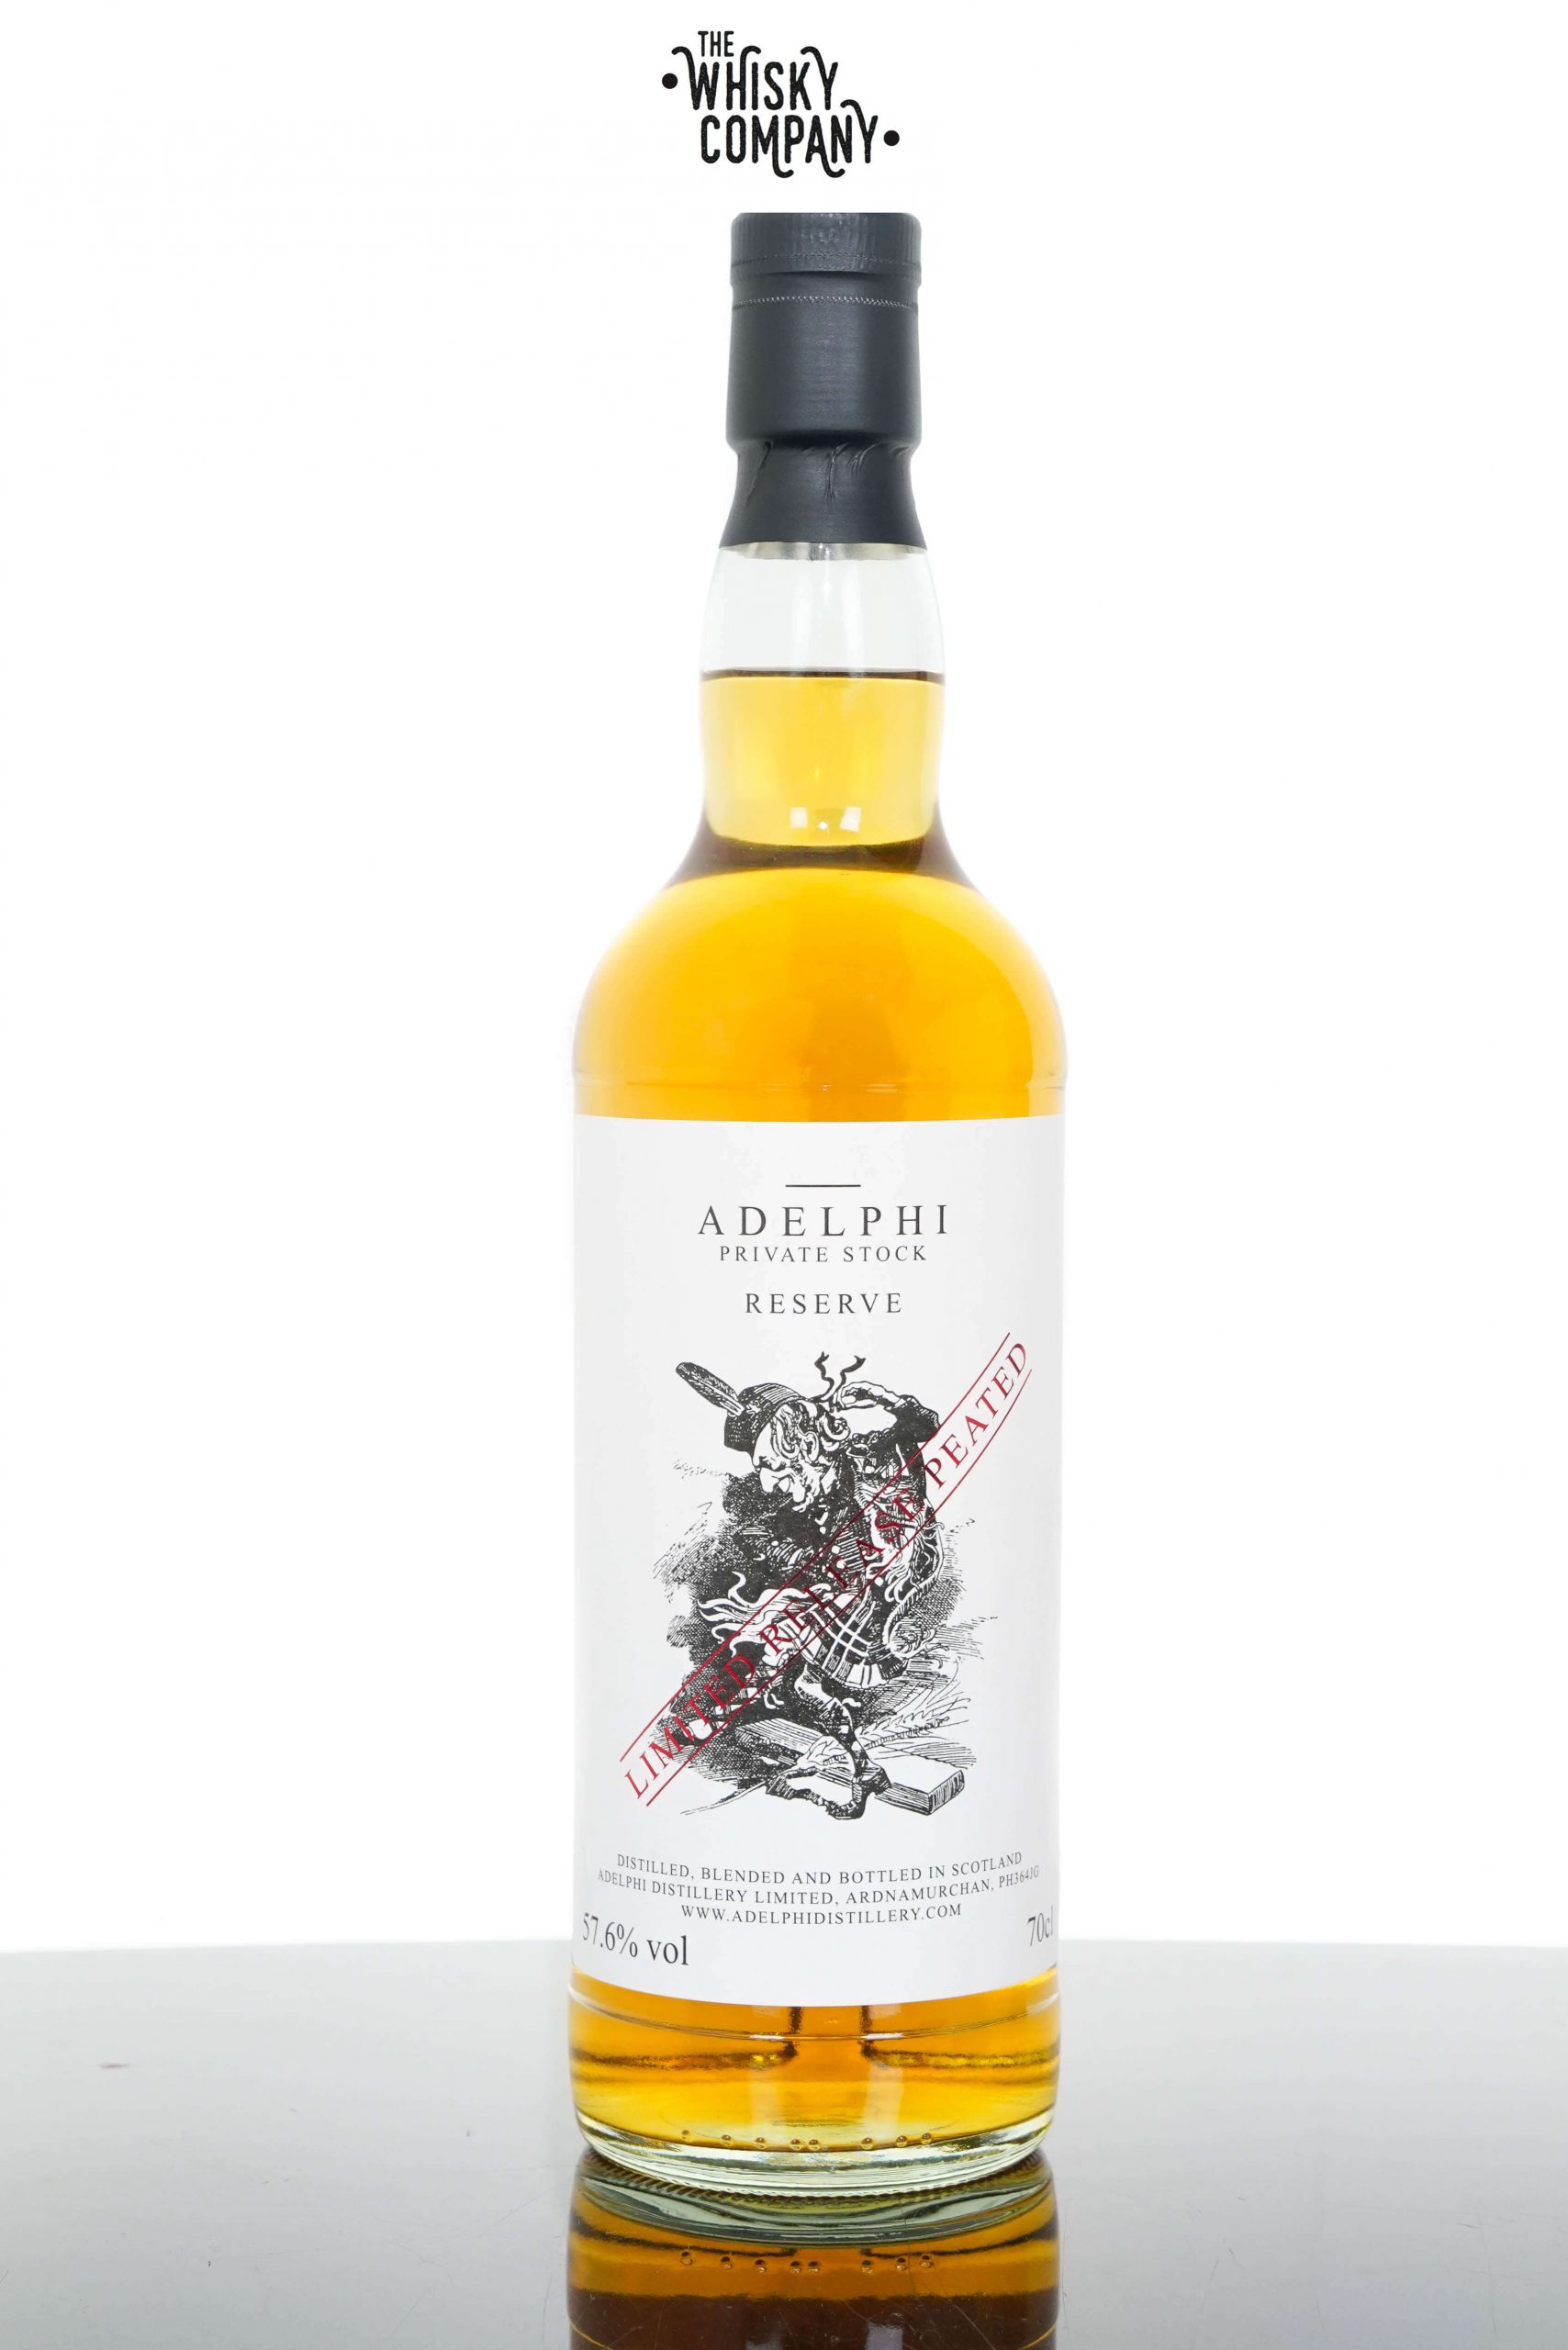 Adelphi Private Reserve Limited Release Blended Scotch Whisky